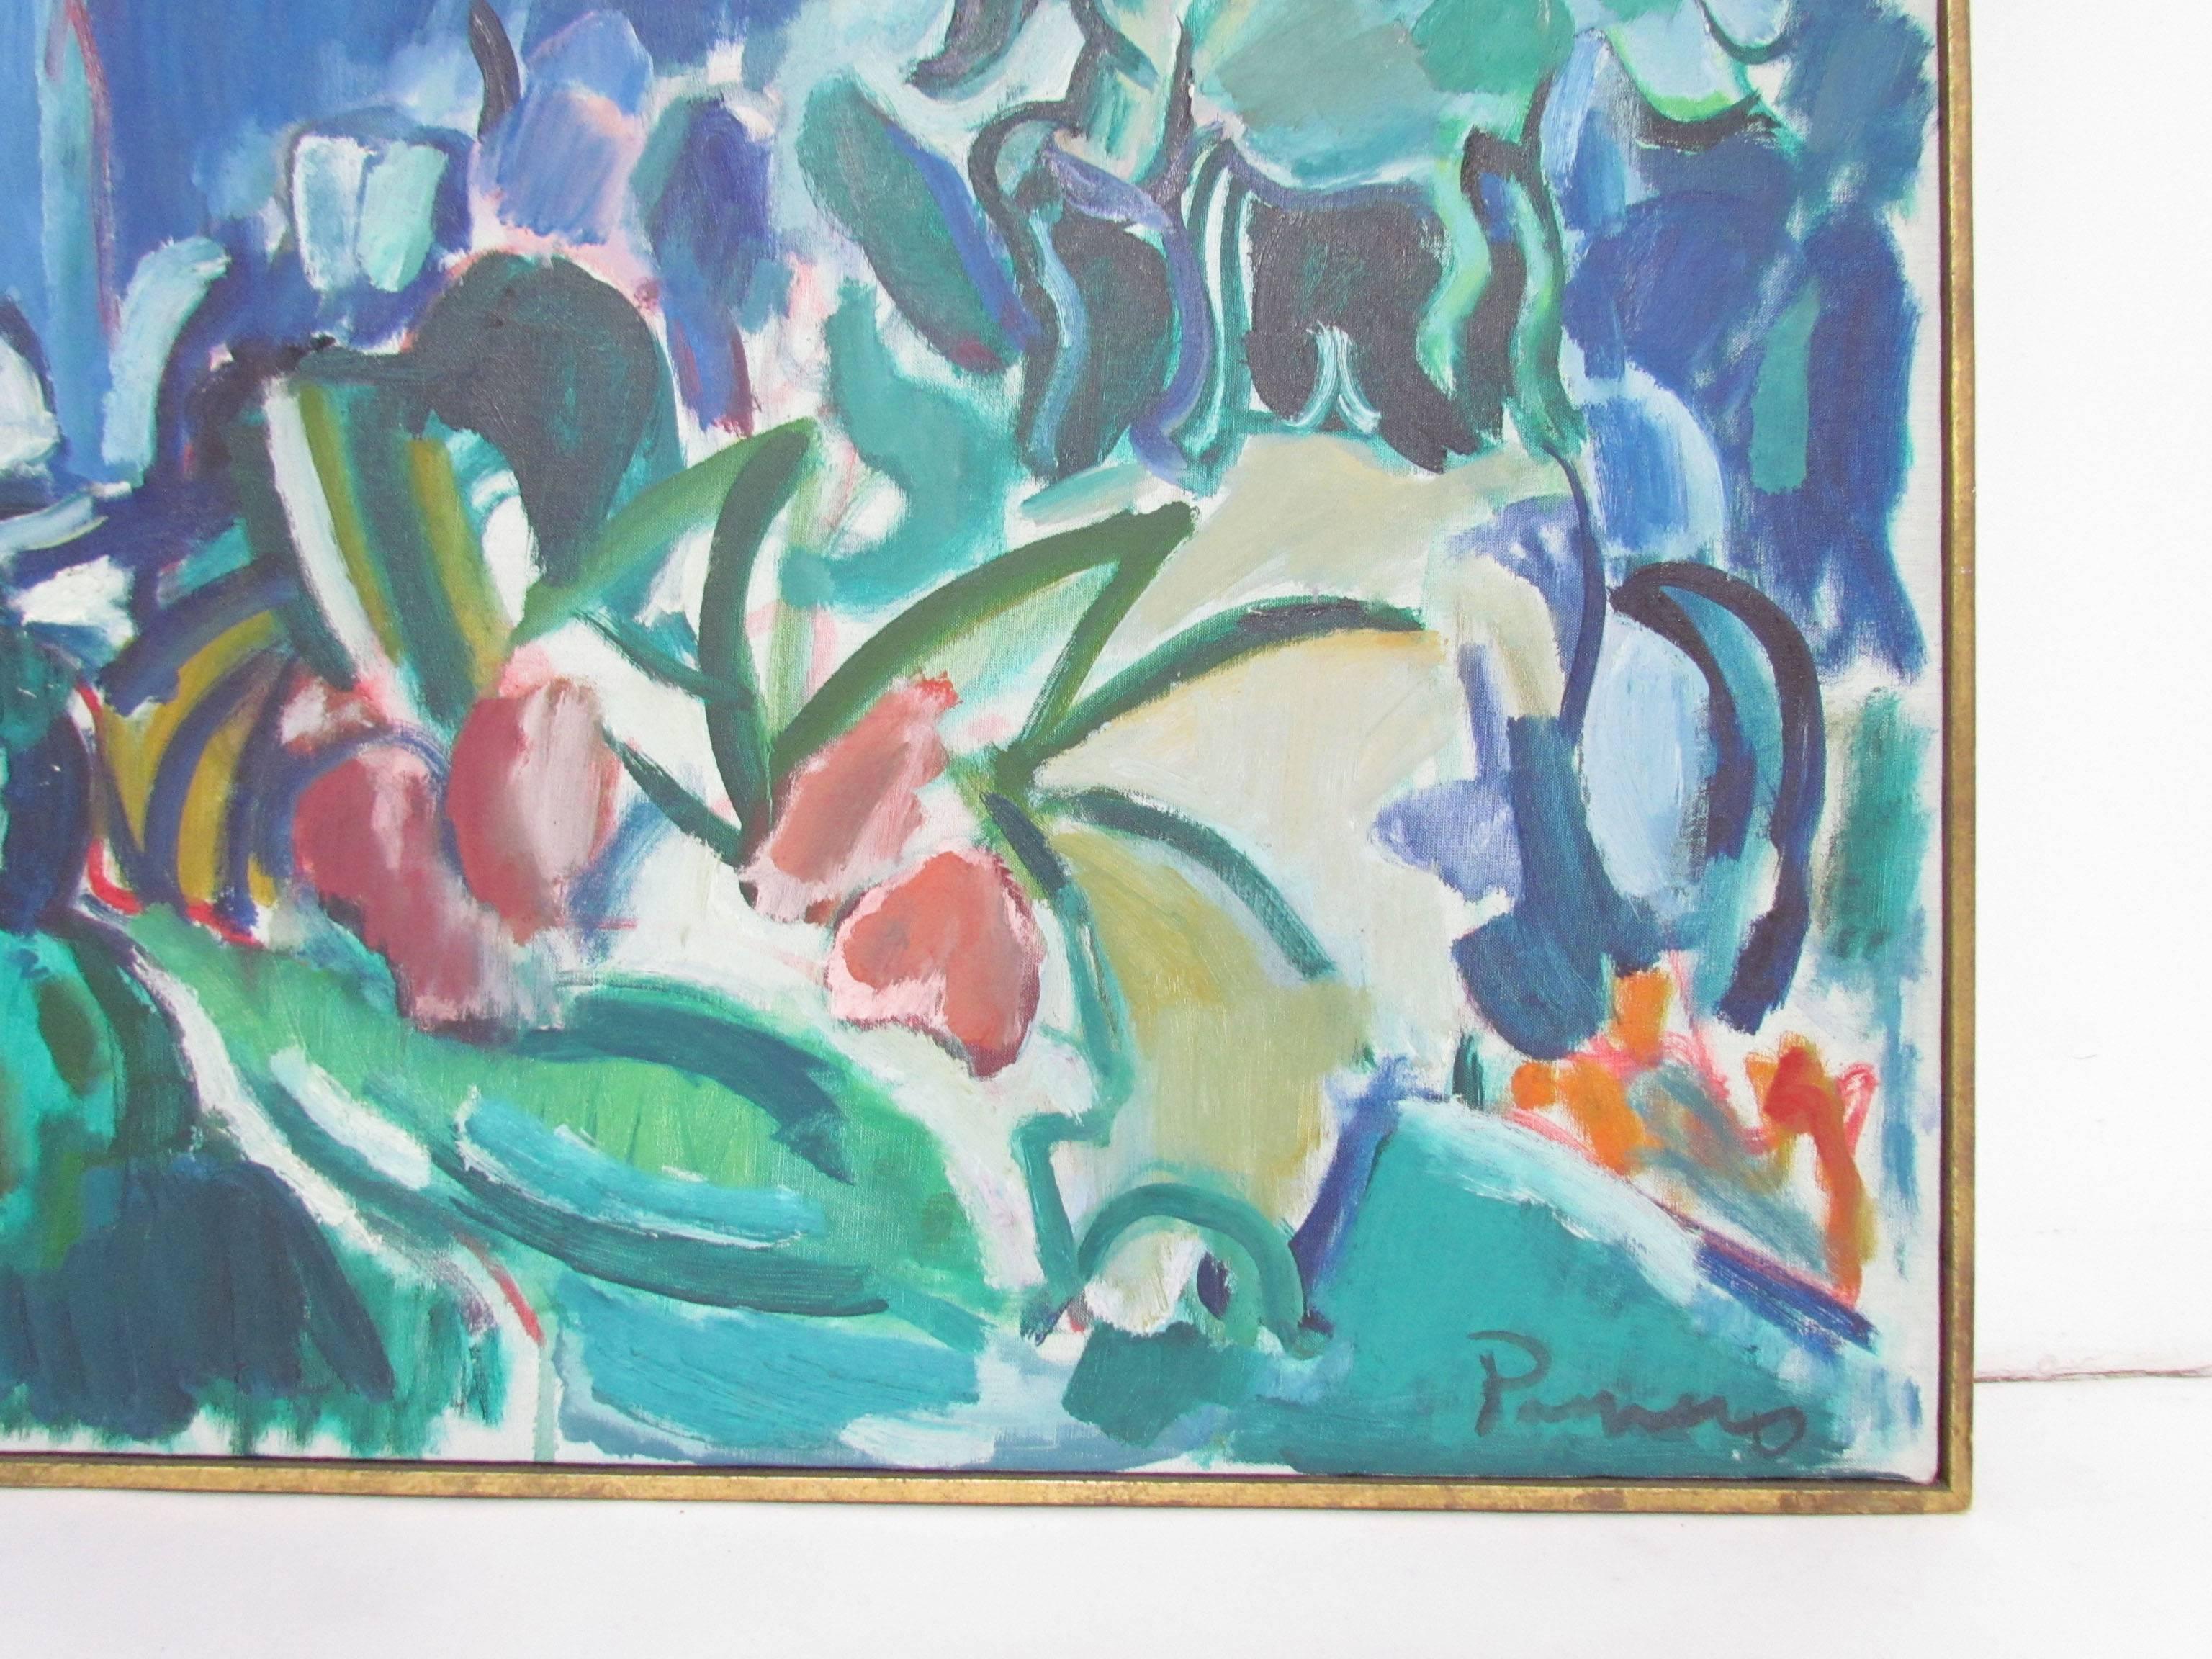 American Abstract Landscape Painting by Boston Artist Marilyn Powers, 1961